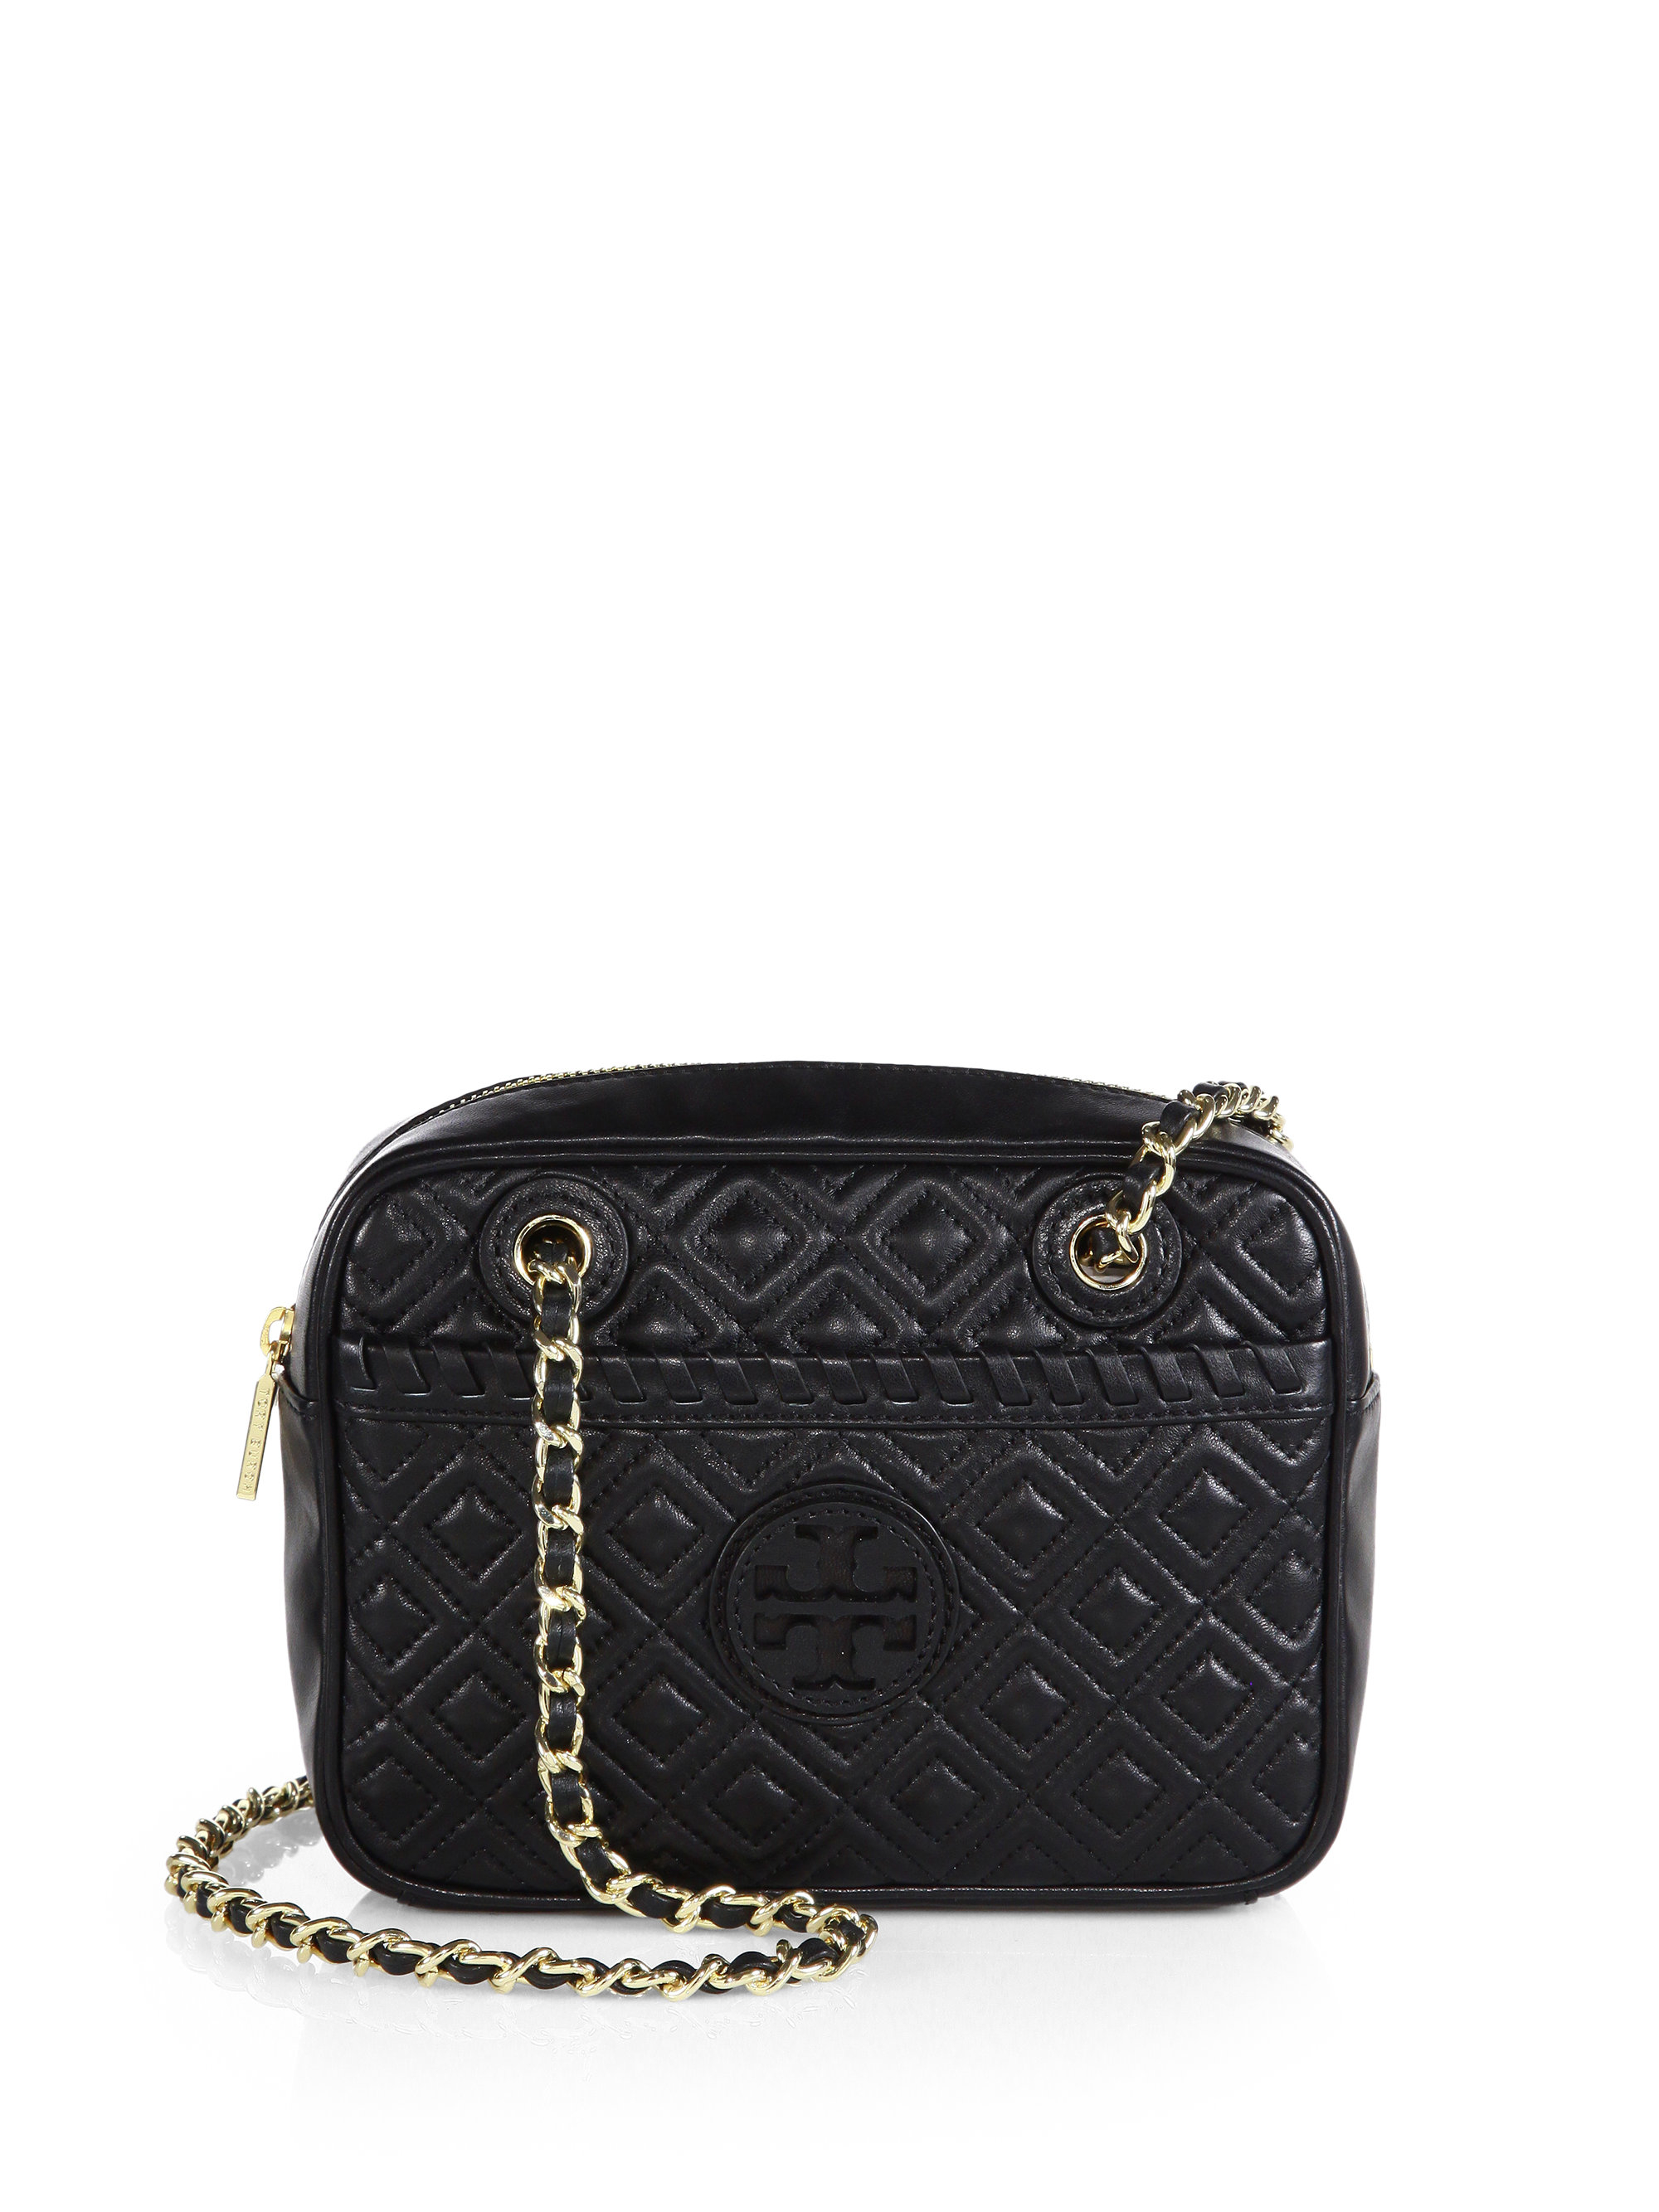 Tory burch Marion Quilted Crossbody Bag in Black | Lyst